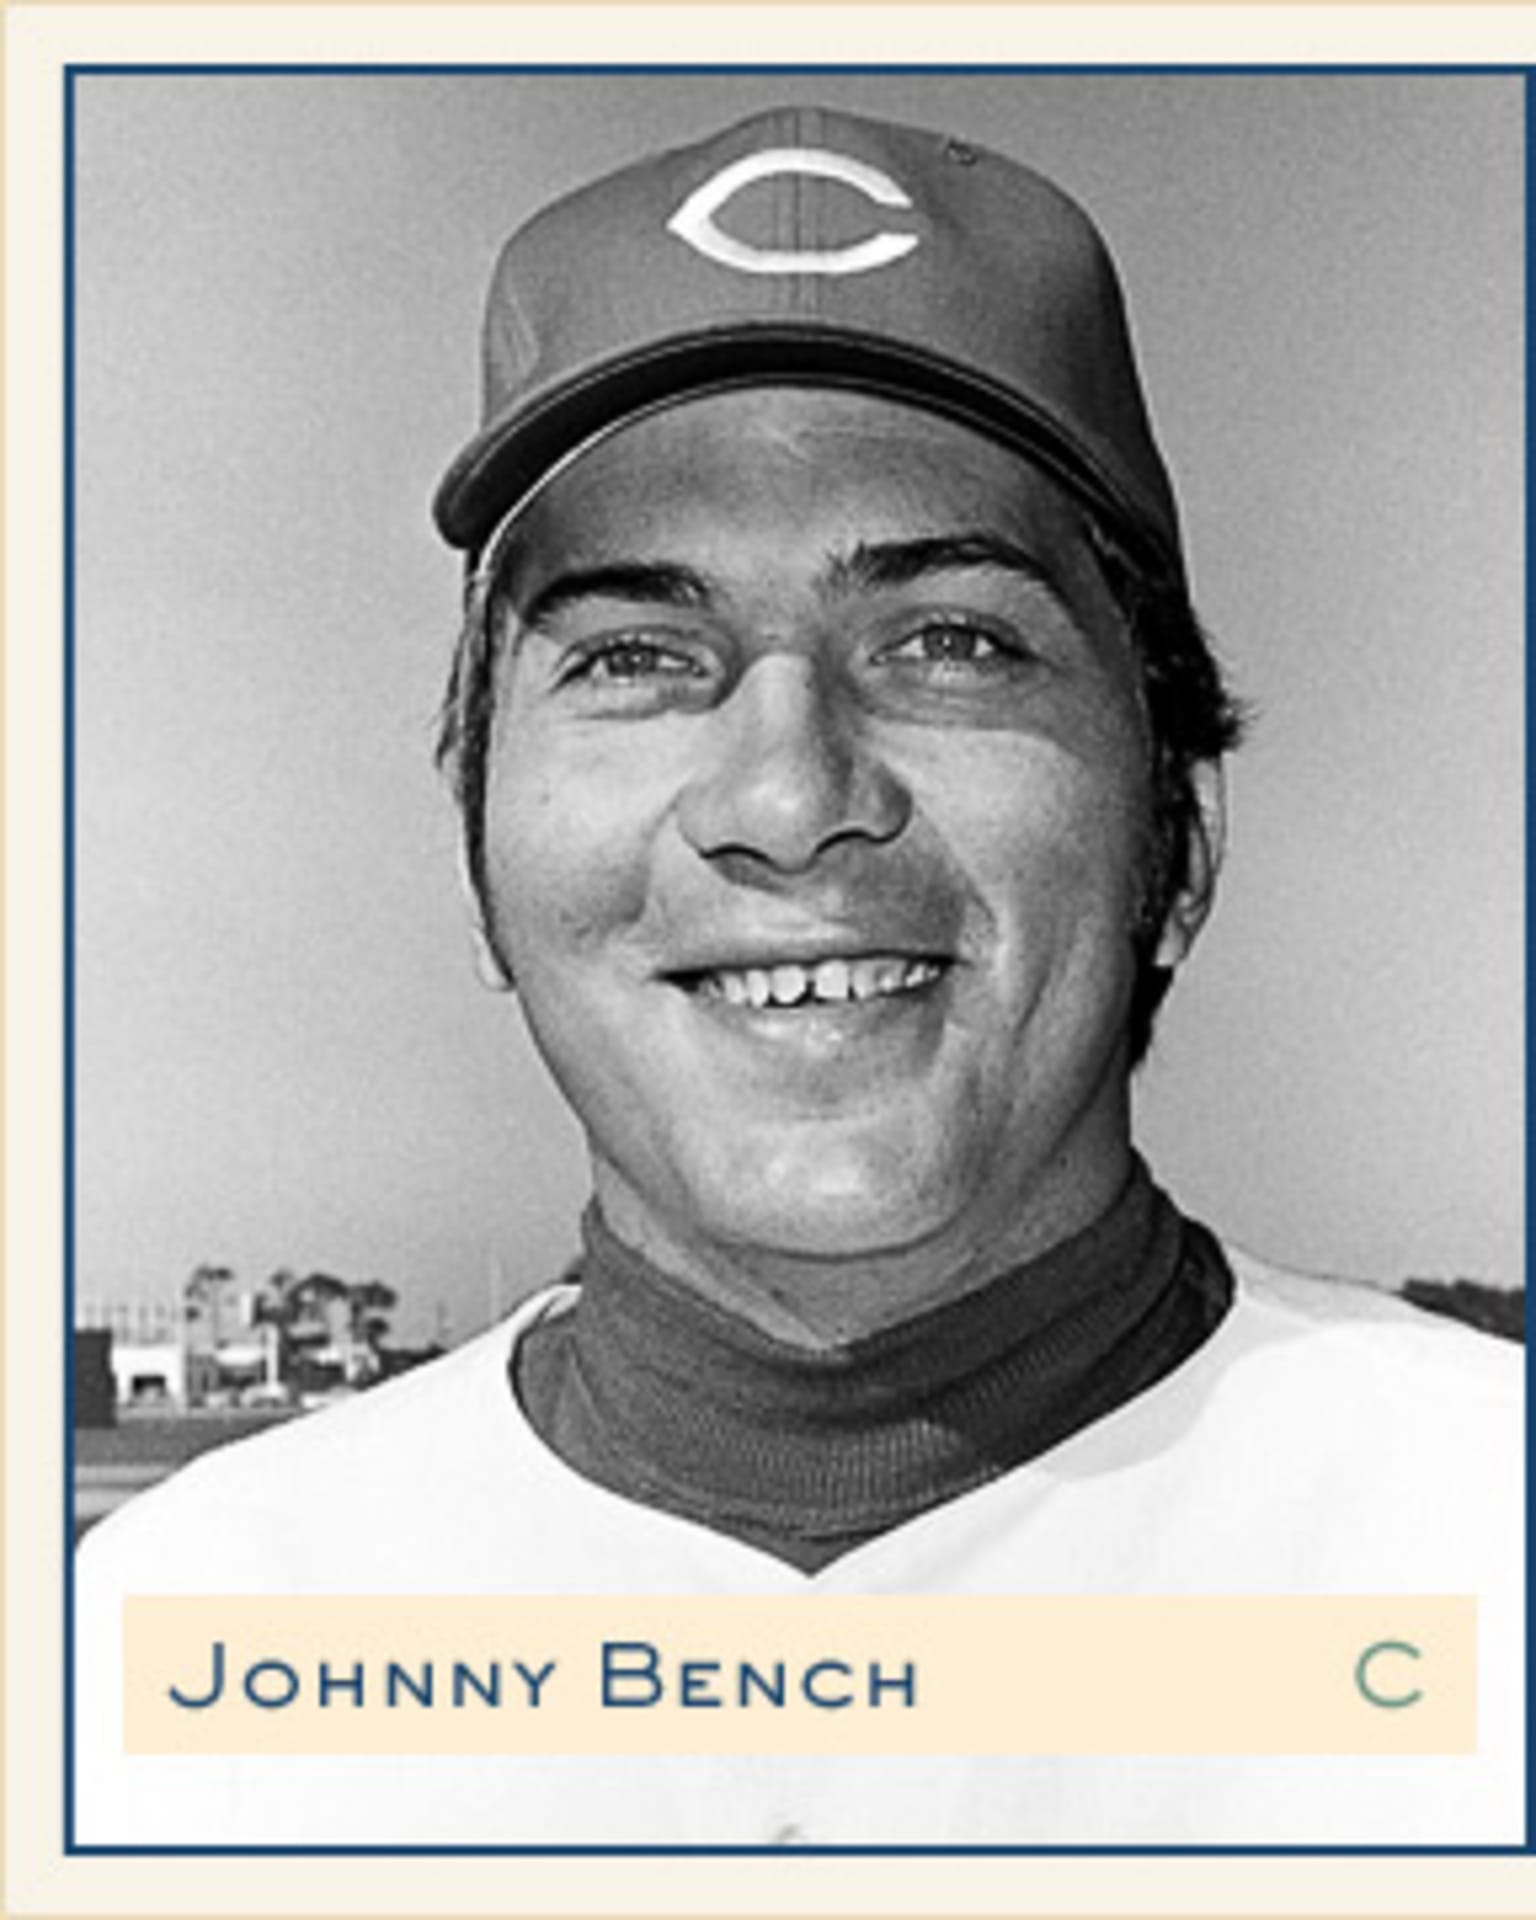 Johnny Bench, Class of 1984